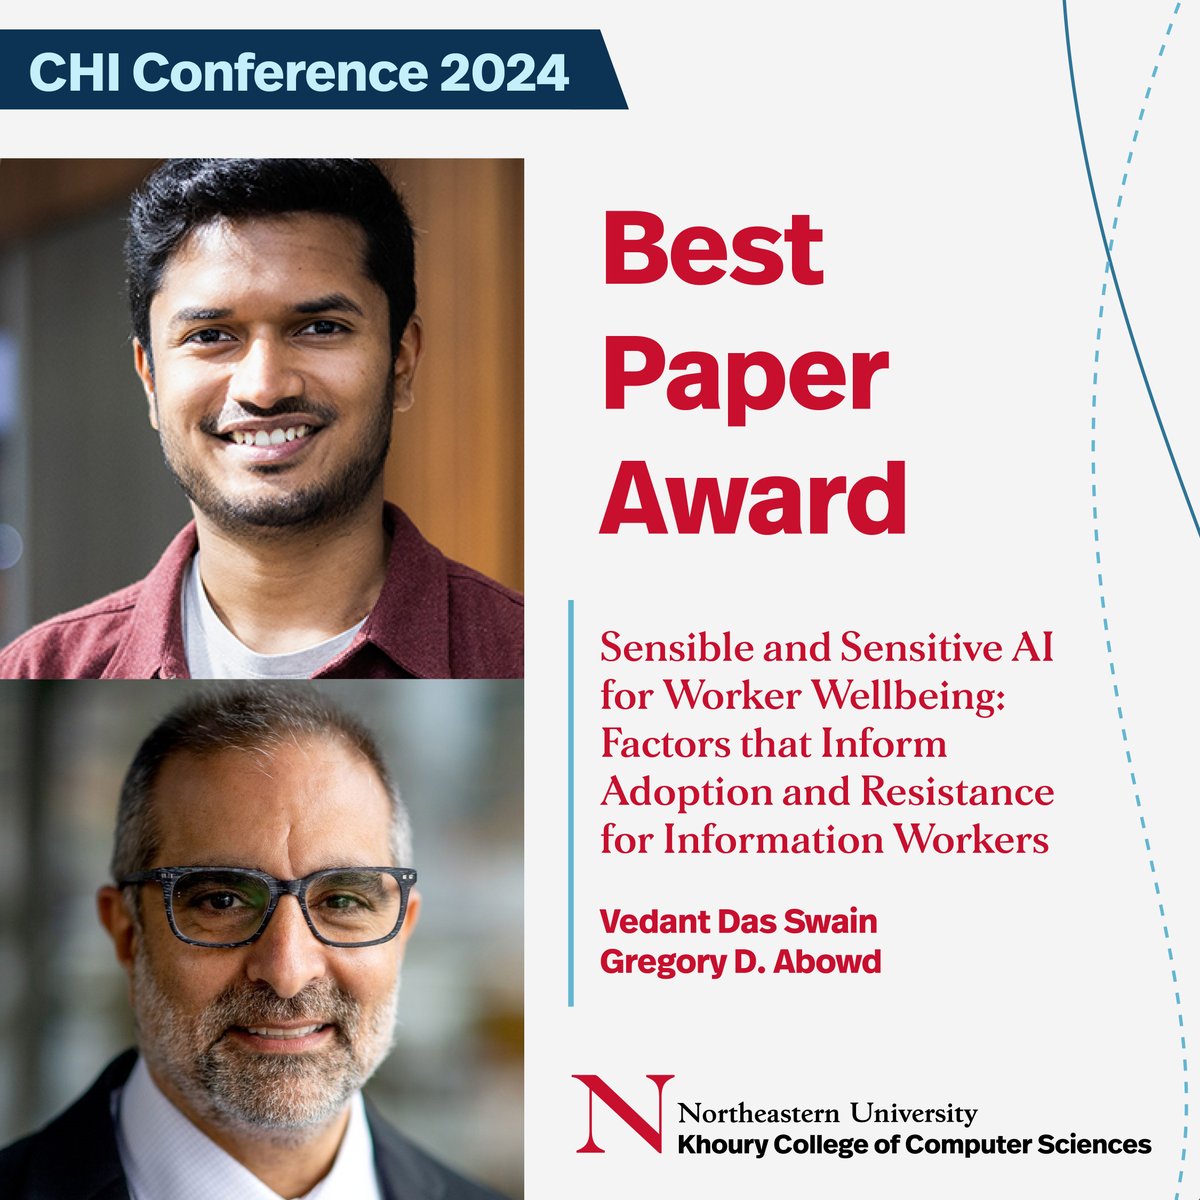 Congratulations to Vedant Das Swain and Gregory D. Abowd for receiving the Best Paper for 'Sensible and Sensitive AI for Worker Wellbeing: Factors that Inform Adoption and Resistance for Information Workers,' about Passive Sensing–enabled AI! Learn more bit.ly/3ycS2gL